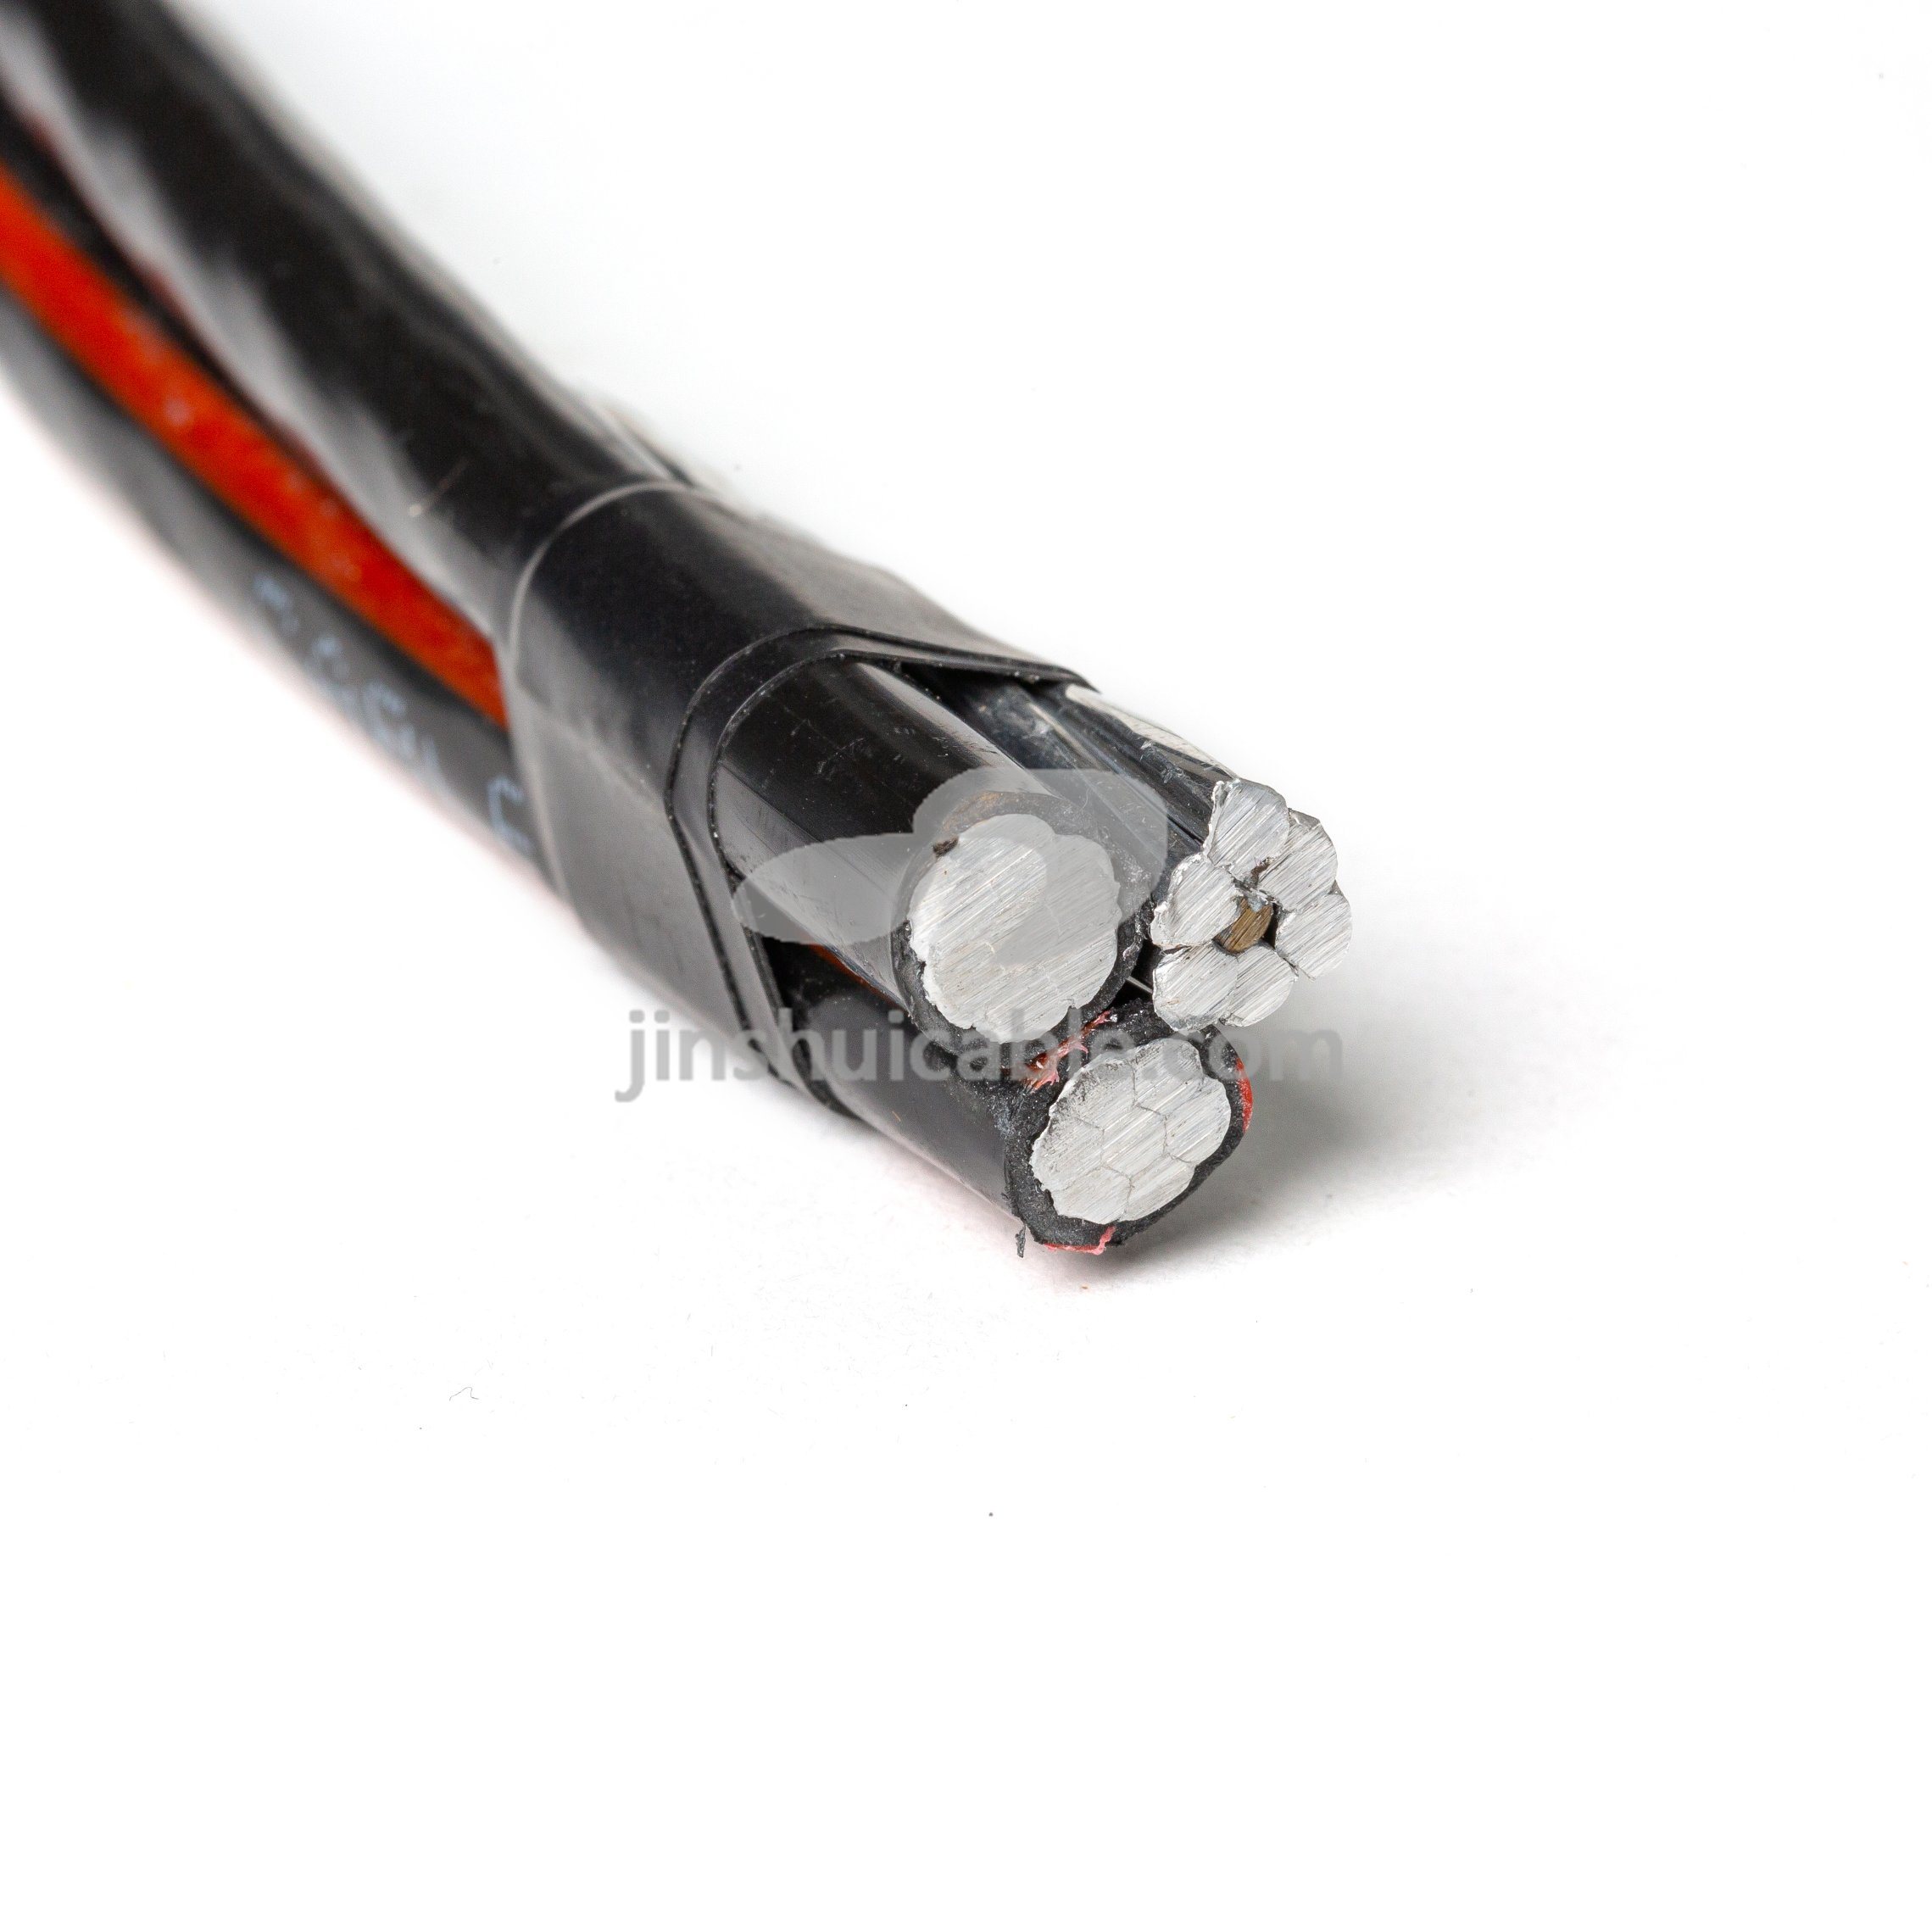 600V XLPE Insulation ABC Cable Used for Overhead Price in Kenya